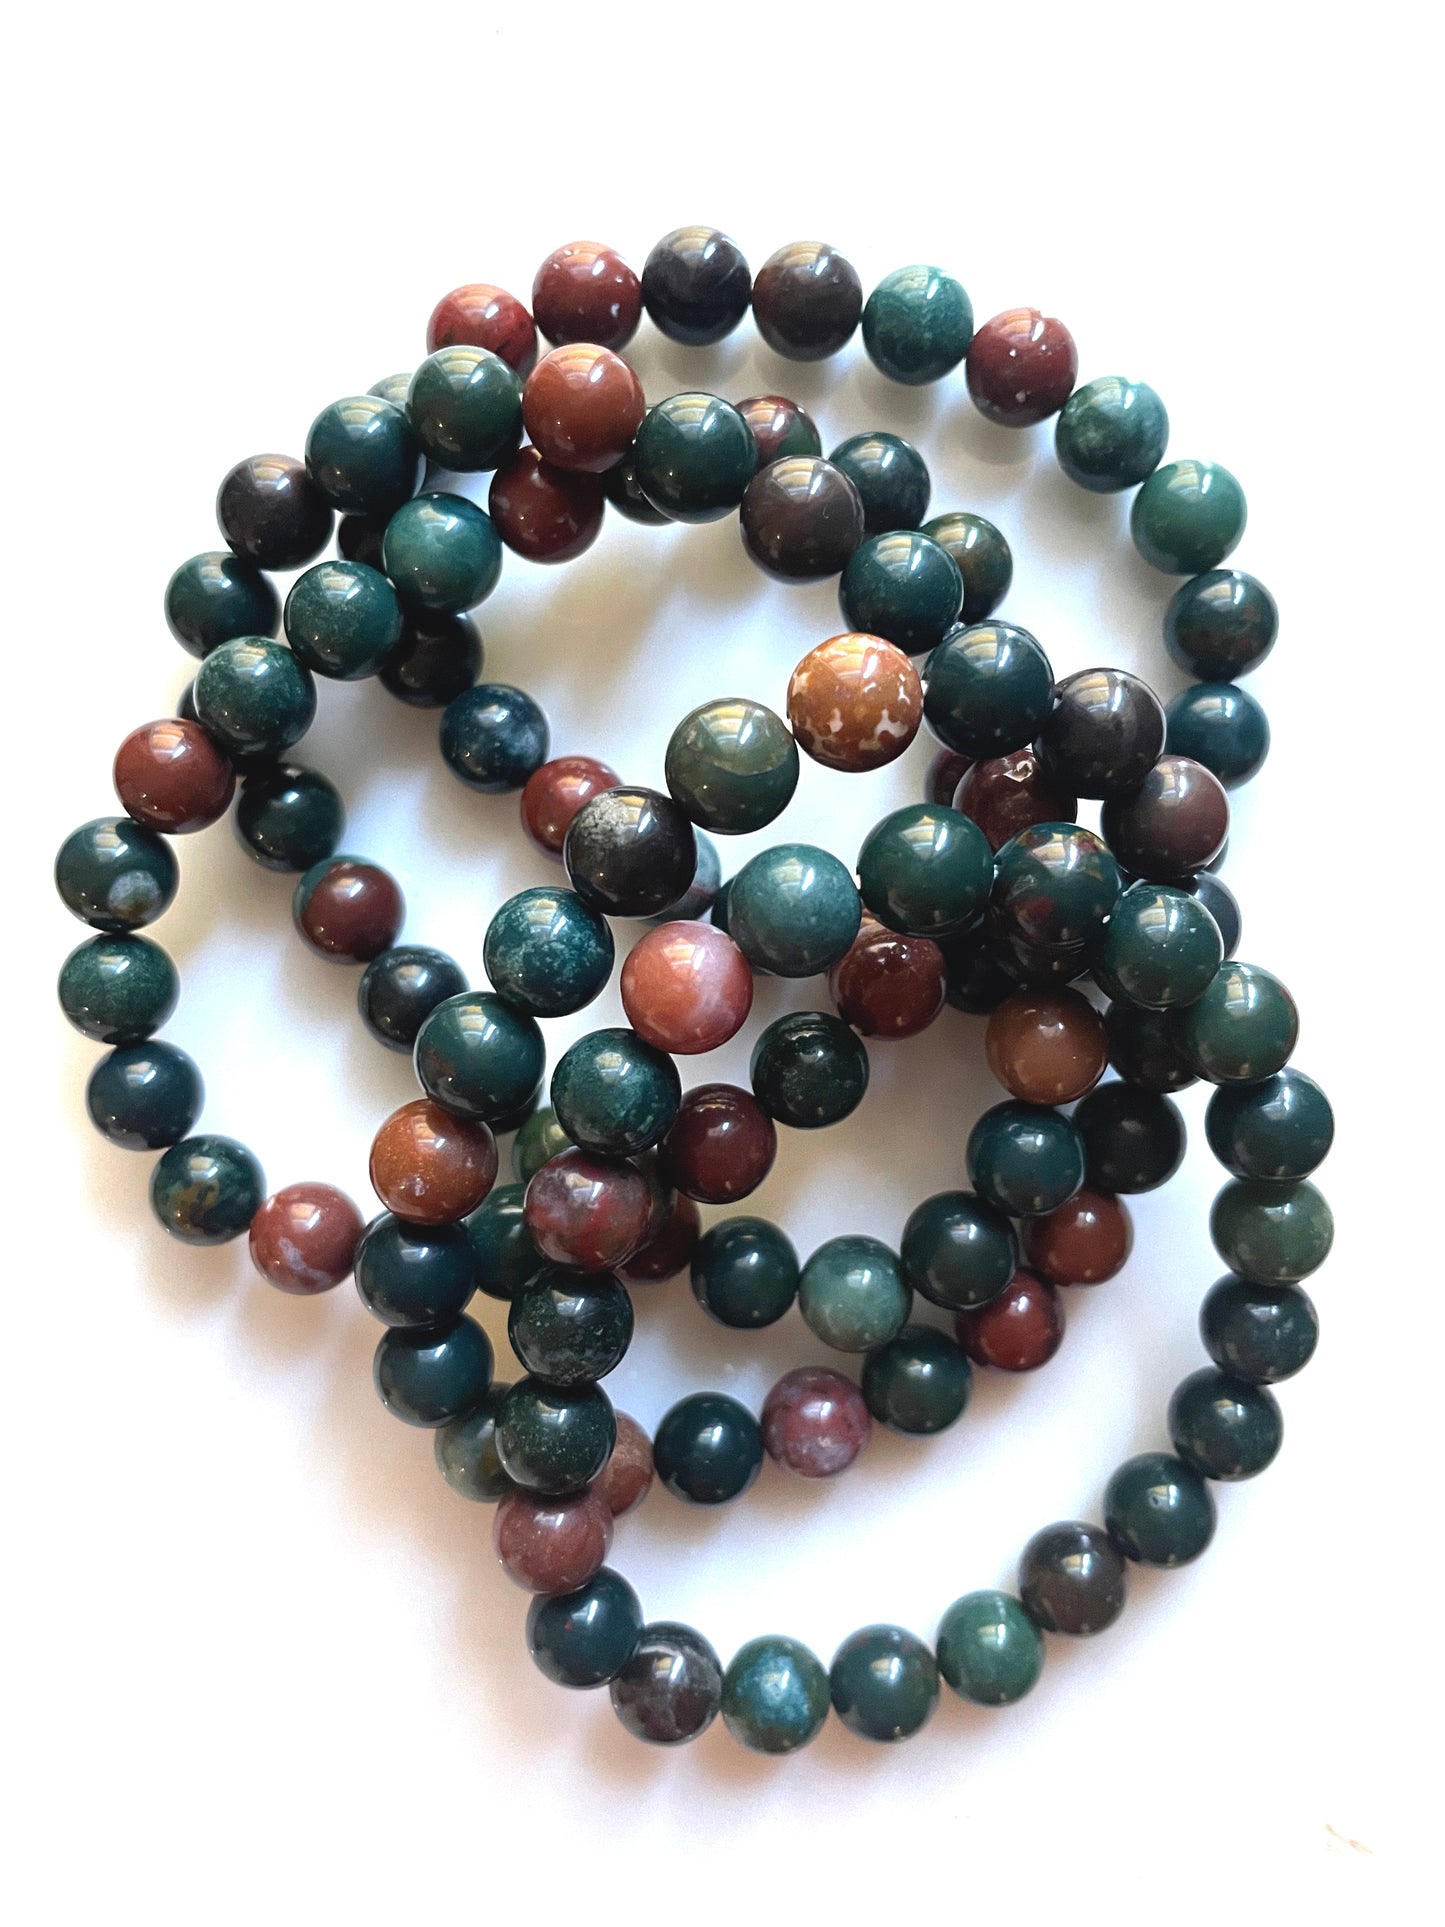 Healing the body with Bloodstone